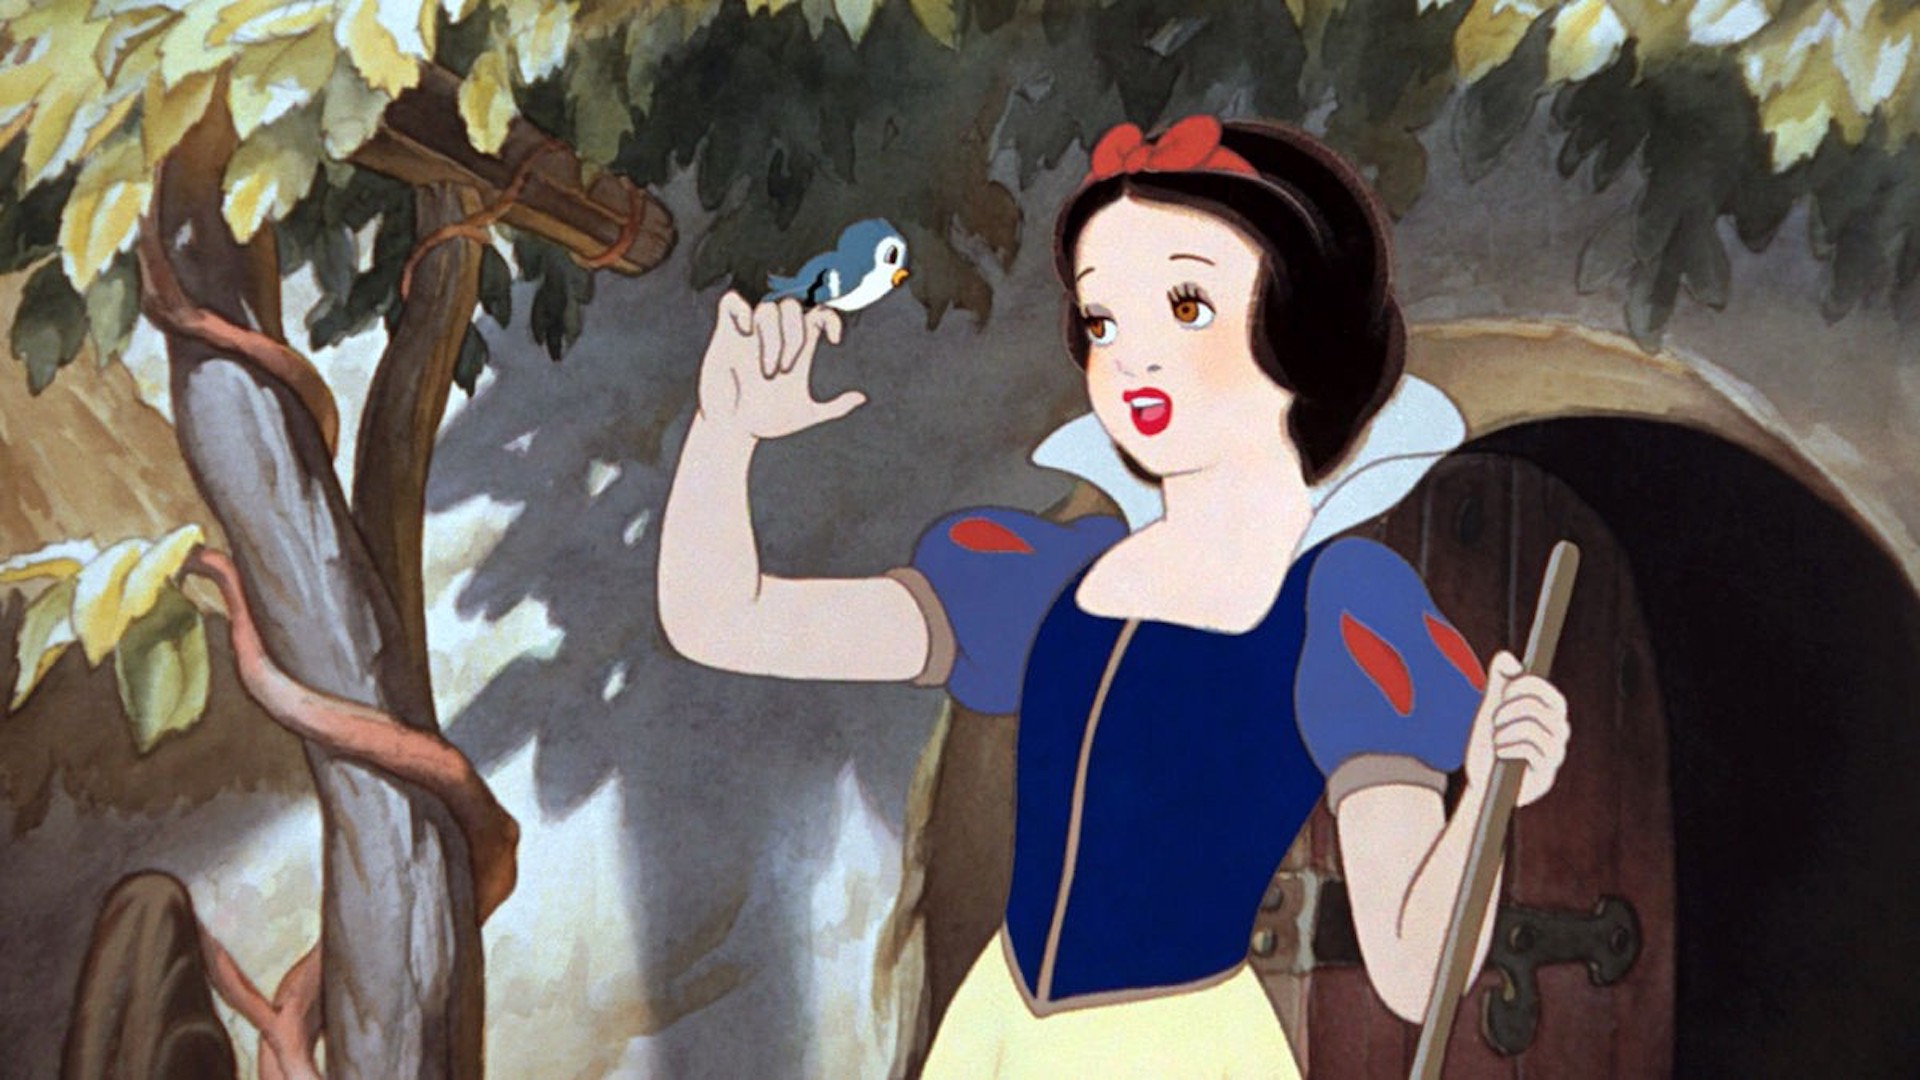 A scene from Snow White